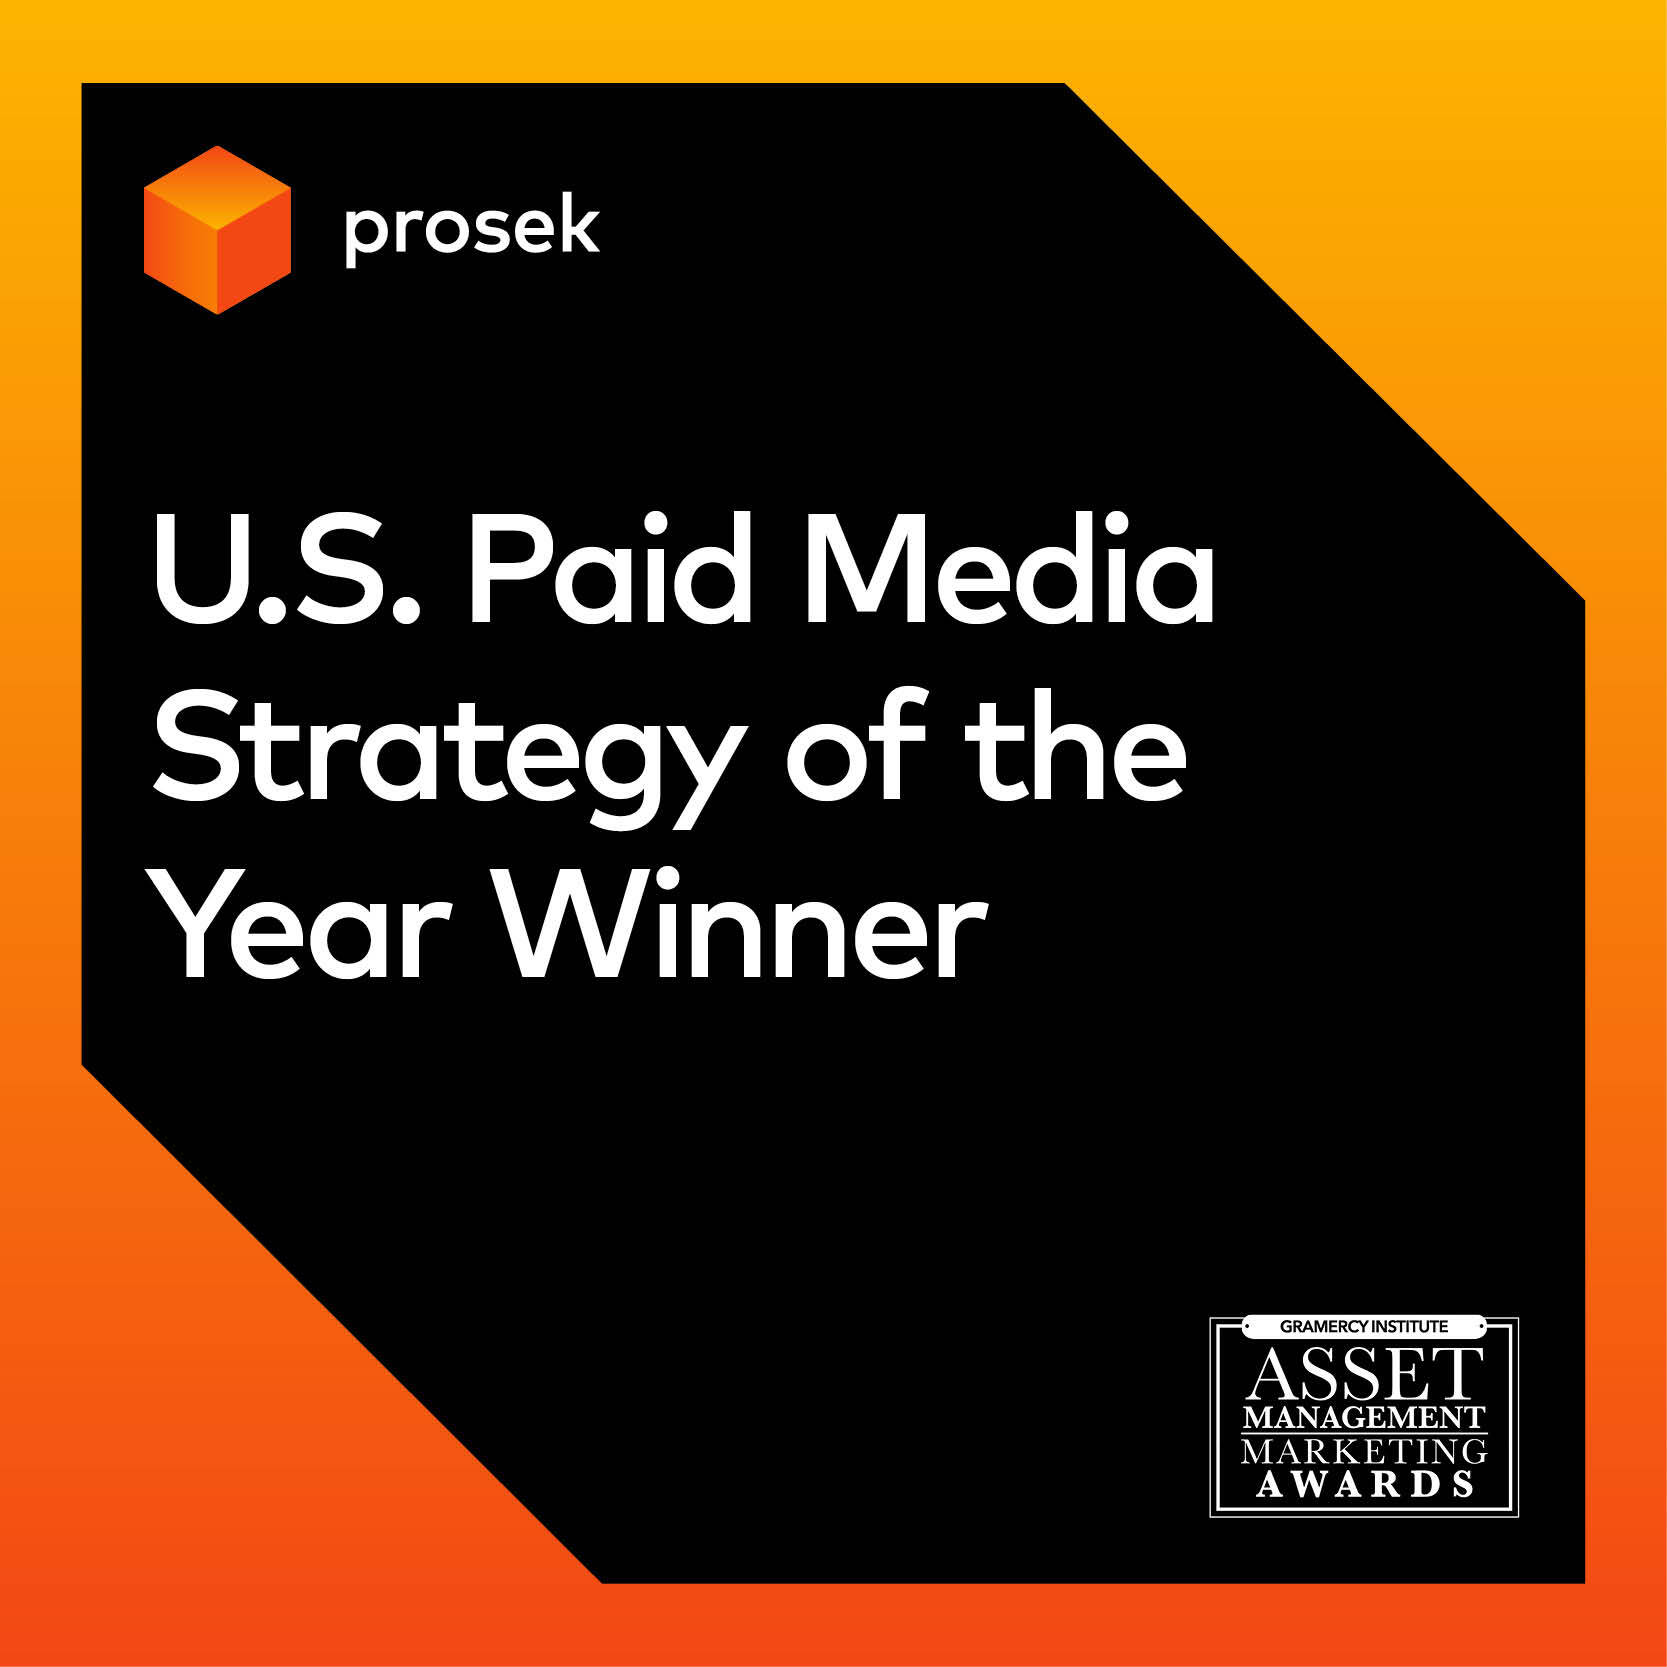 Prosek Paid Media Strategy of the Year